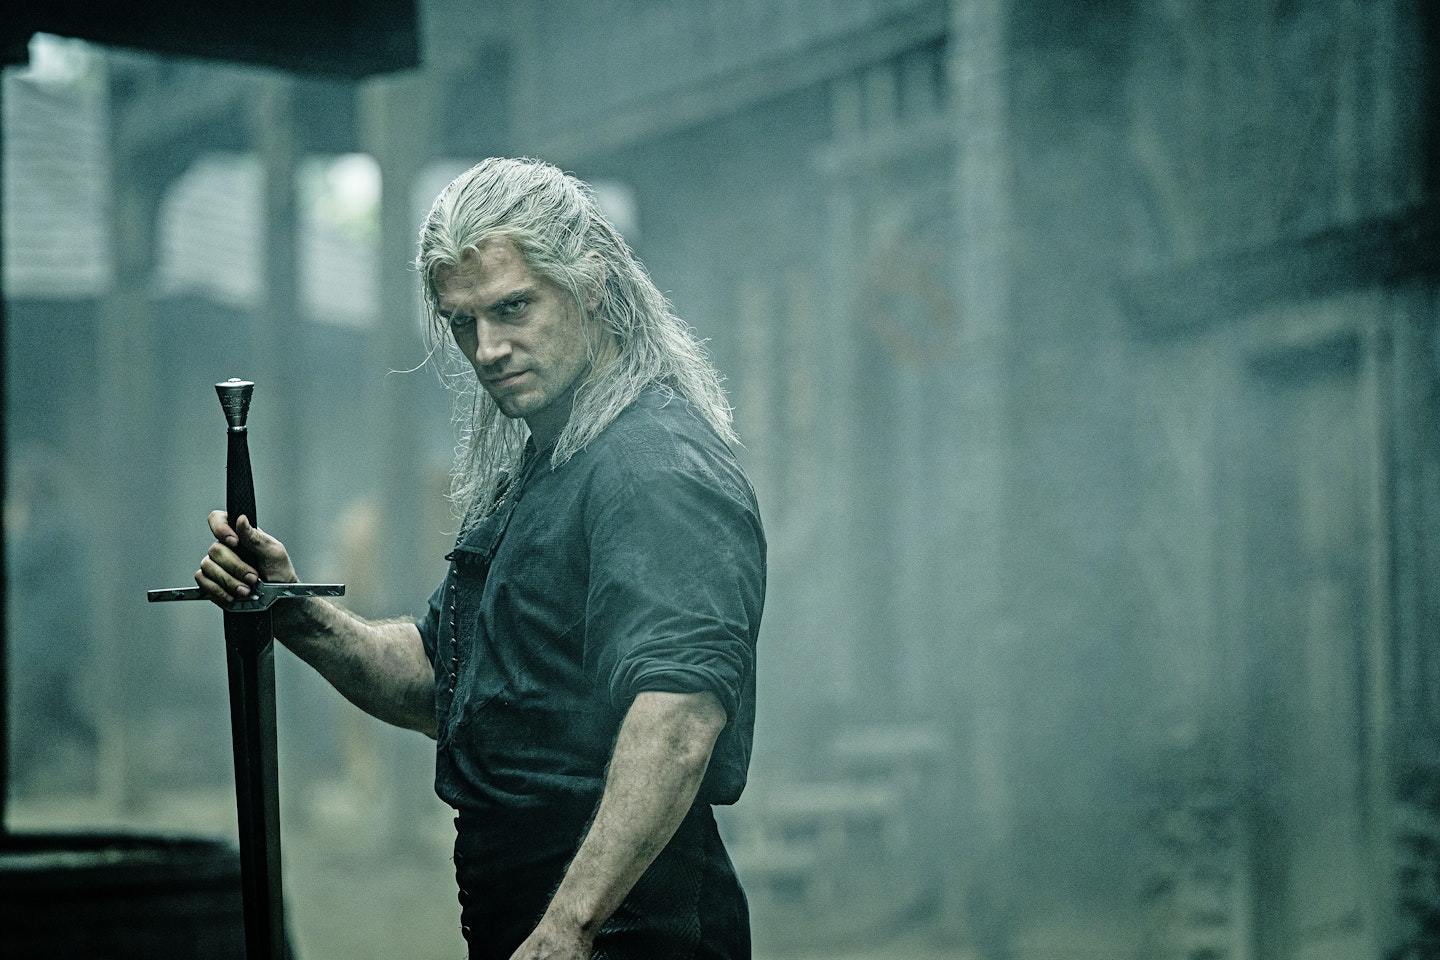 IMDb Rotten Tomatoes 95% liked this TV show Google users The witcher  Geralt, a mutated monster hunter, struggles to find his place in a world in  which people often prove more wicked